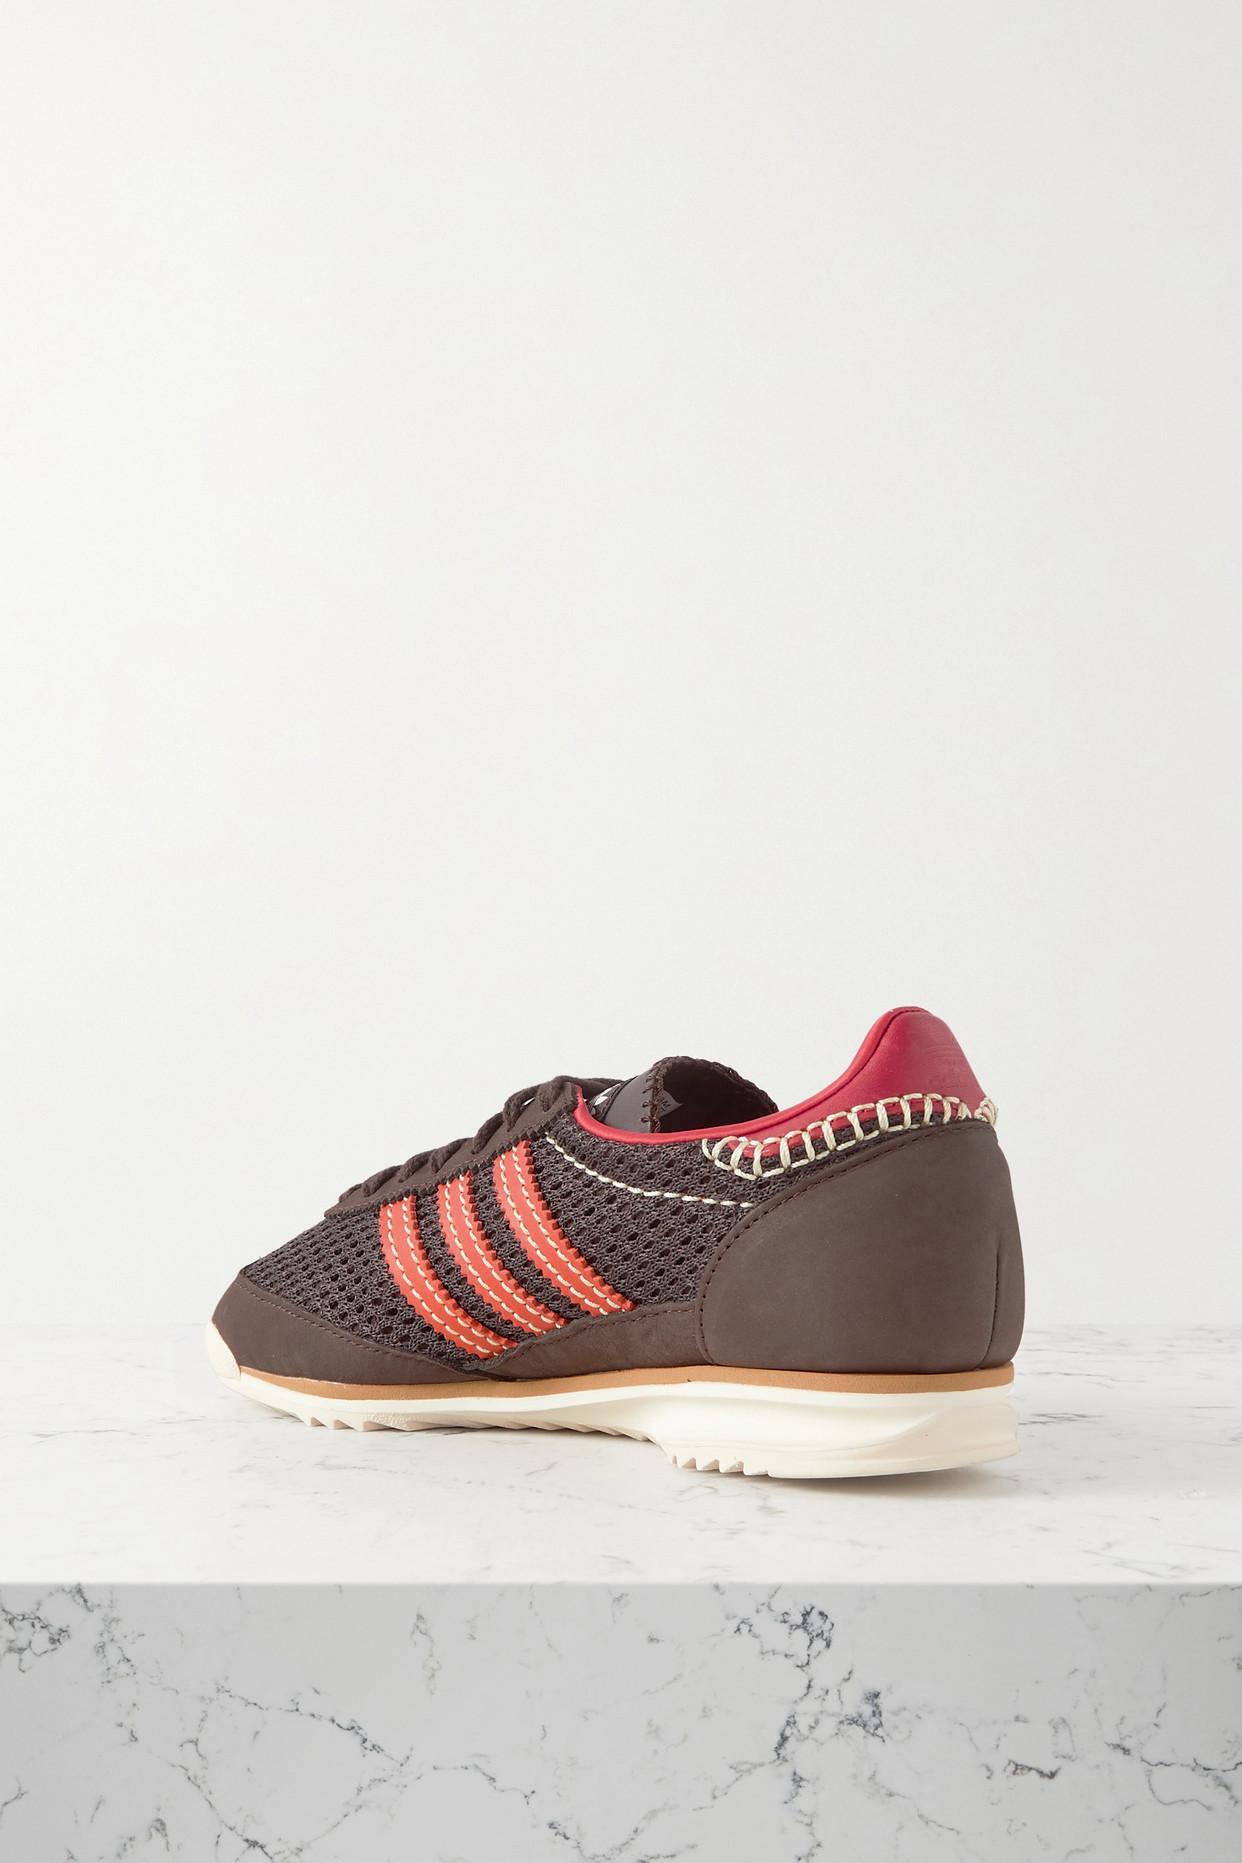 adidas Originals + Wales Bonner Sl72 Leather-trimmed Suede And Mesh  Sneakers in Brown | Lyst